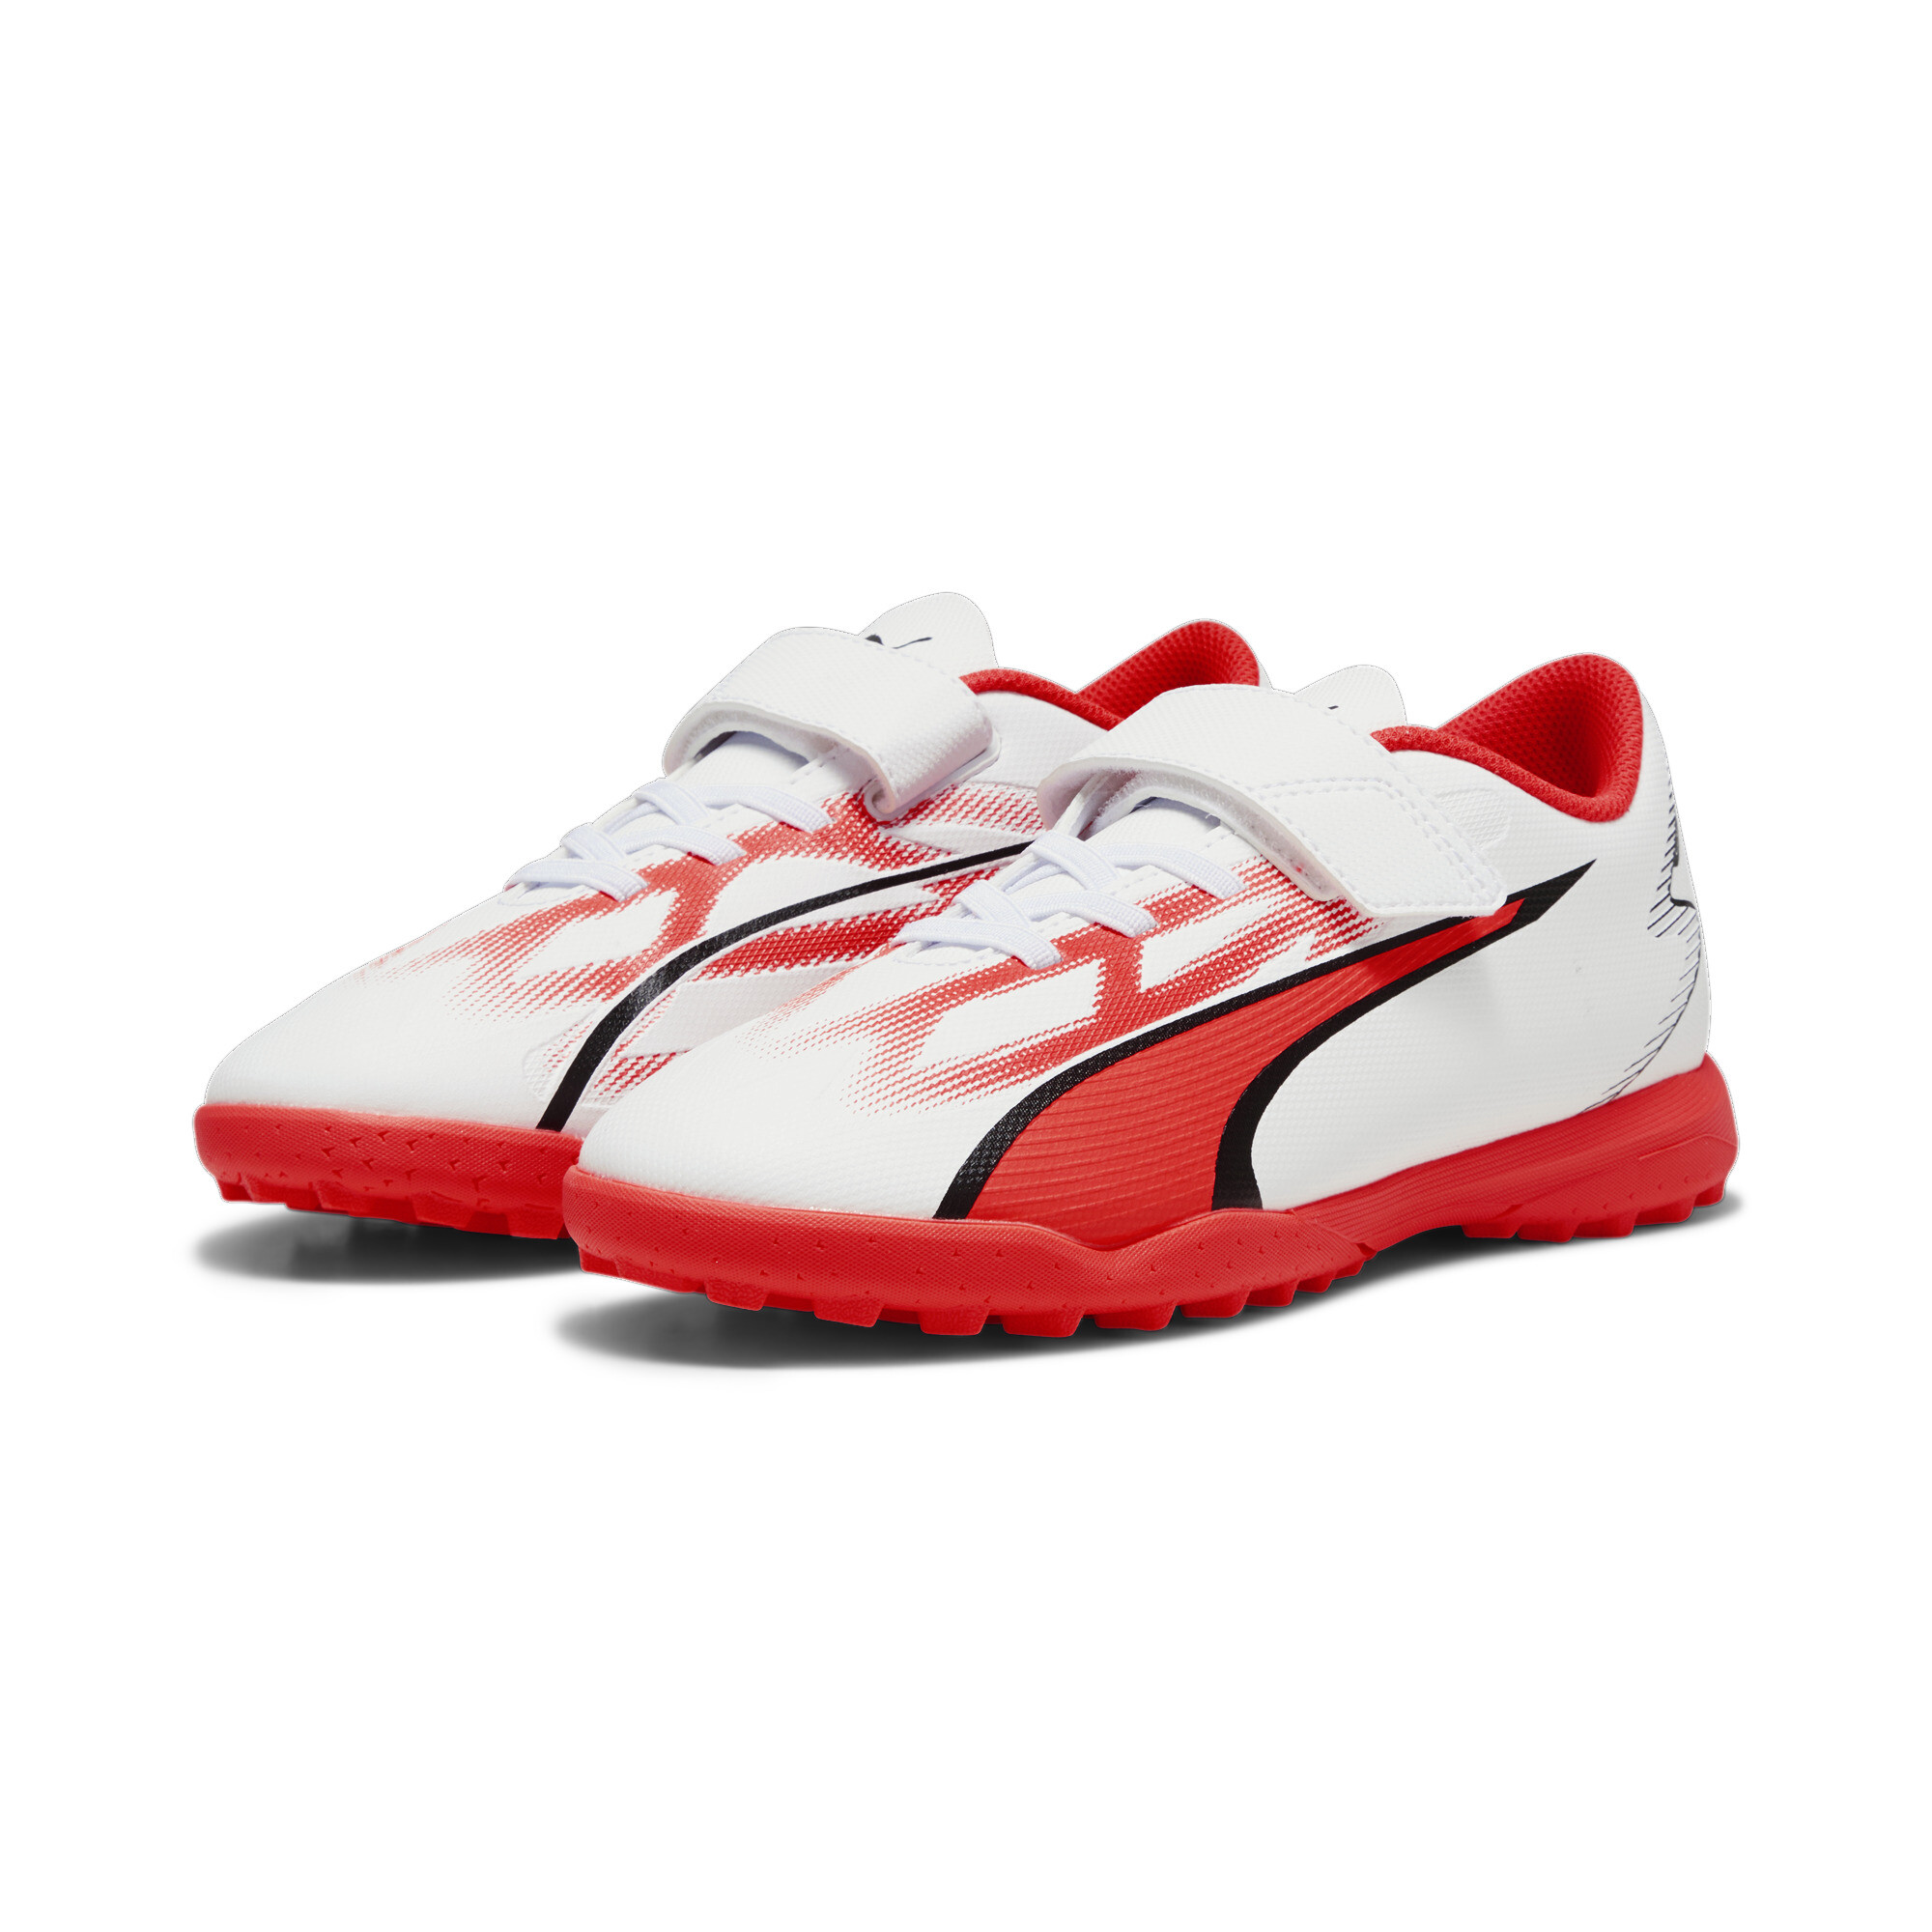 PUMA ULTRA PLAY TT Youth Football Boots In White, Size EU 37